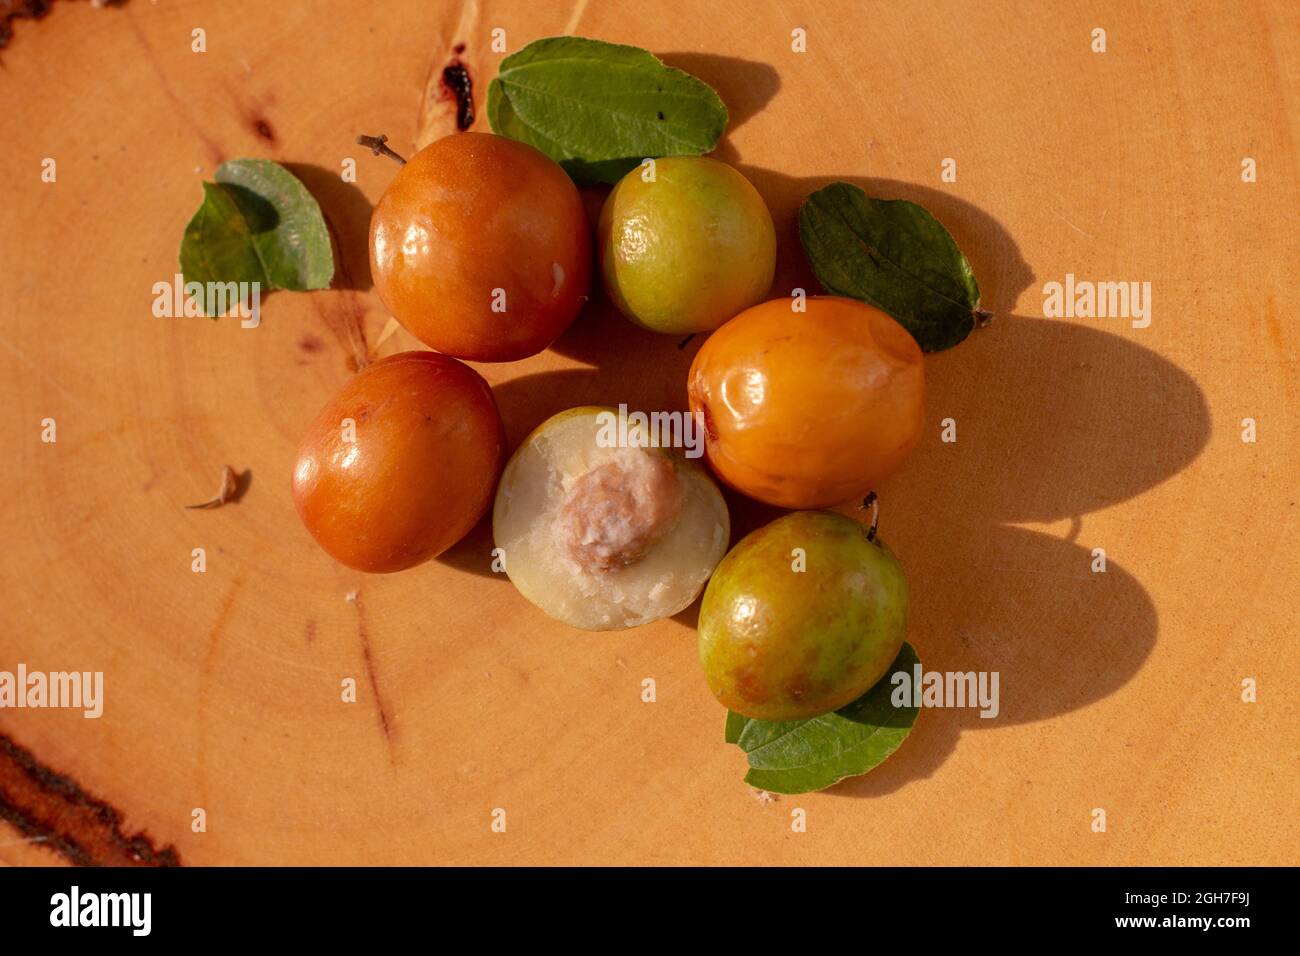 Ziziphus jujuba, commonly called jujube, also known as Chinese date, Chinese apple, Indian plum, Indian jujube, Musawu or Maçanica Stock Photo